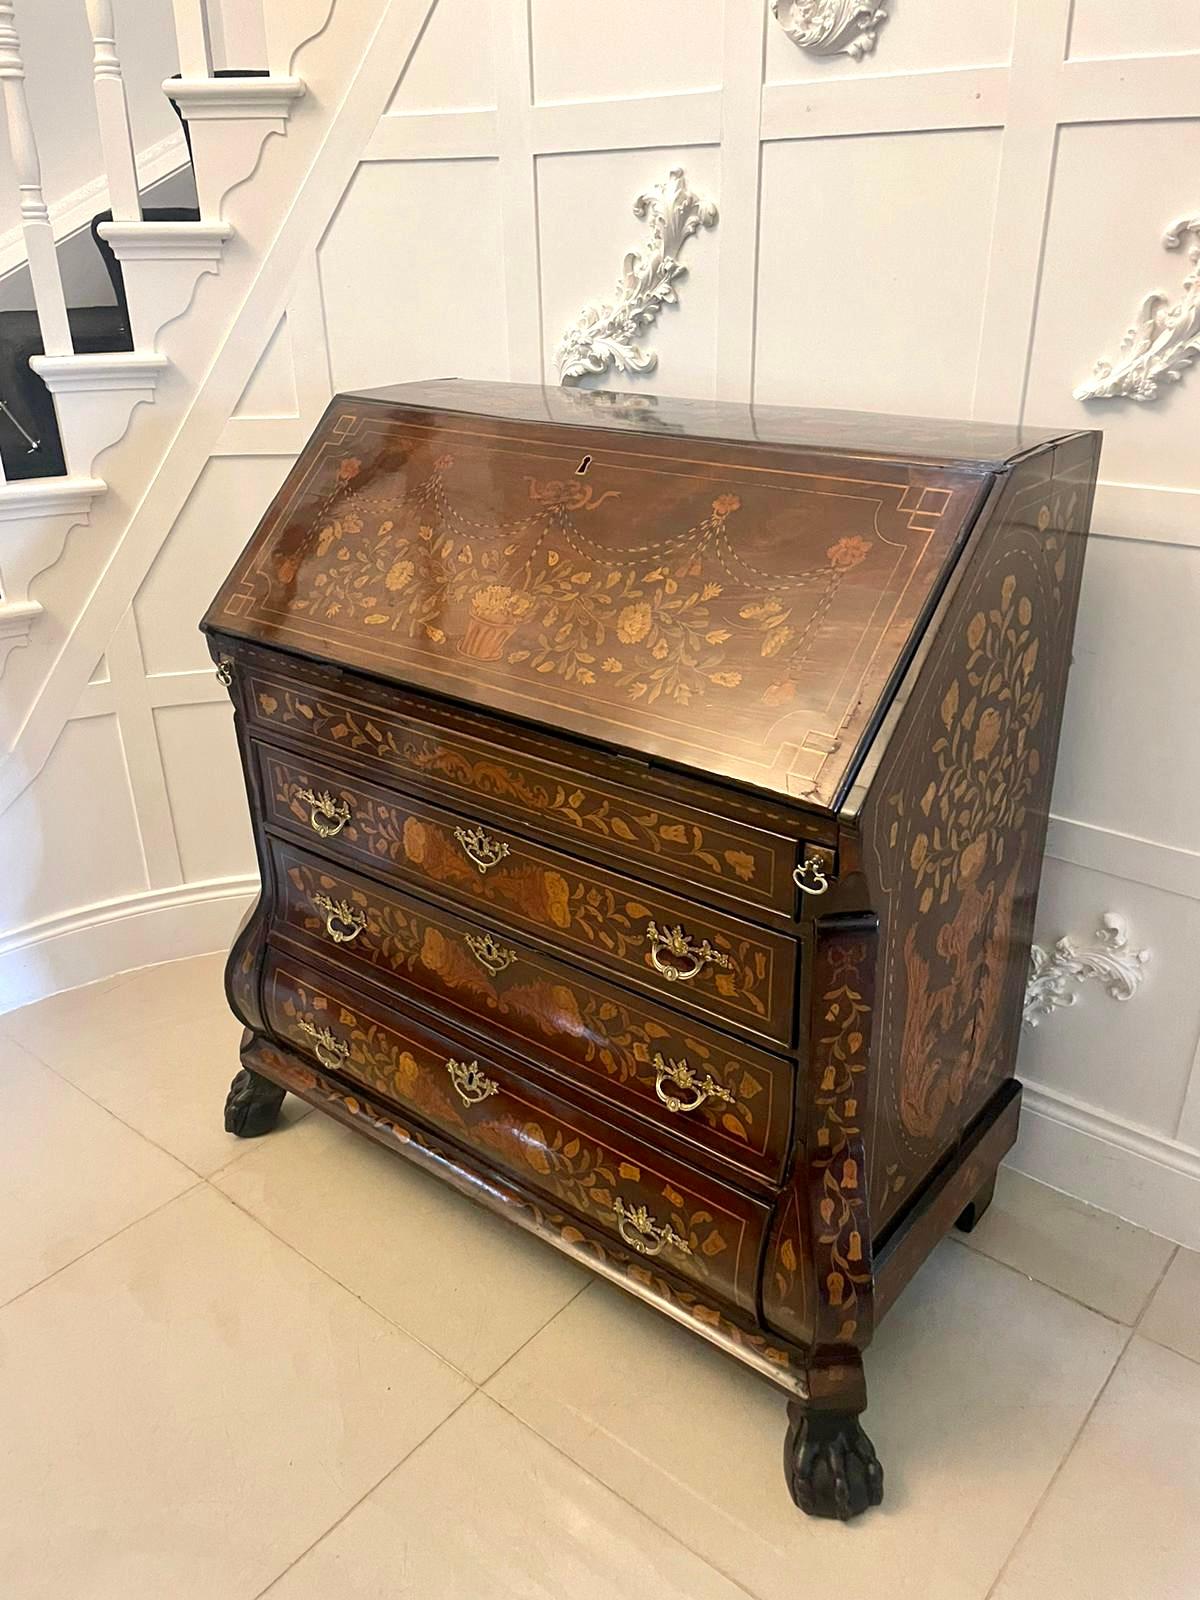 Antique 18th century quality mahogany floral marquetry inlaid bombe shaped bureau 
having a quality floral marquetry fall opening to reveal a fitted interior consisting of drawers, pigeon holes, door and a well above three bombe shaped floral